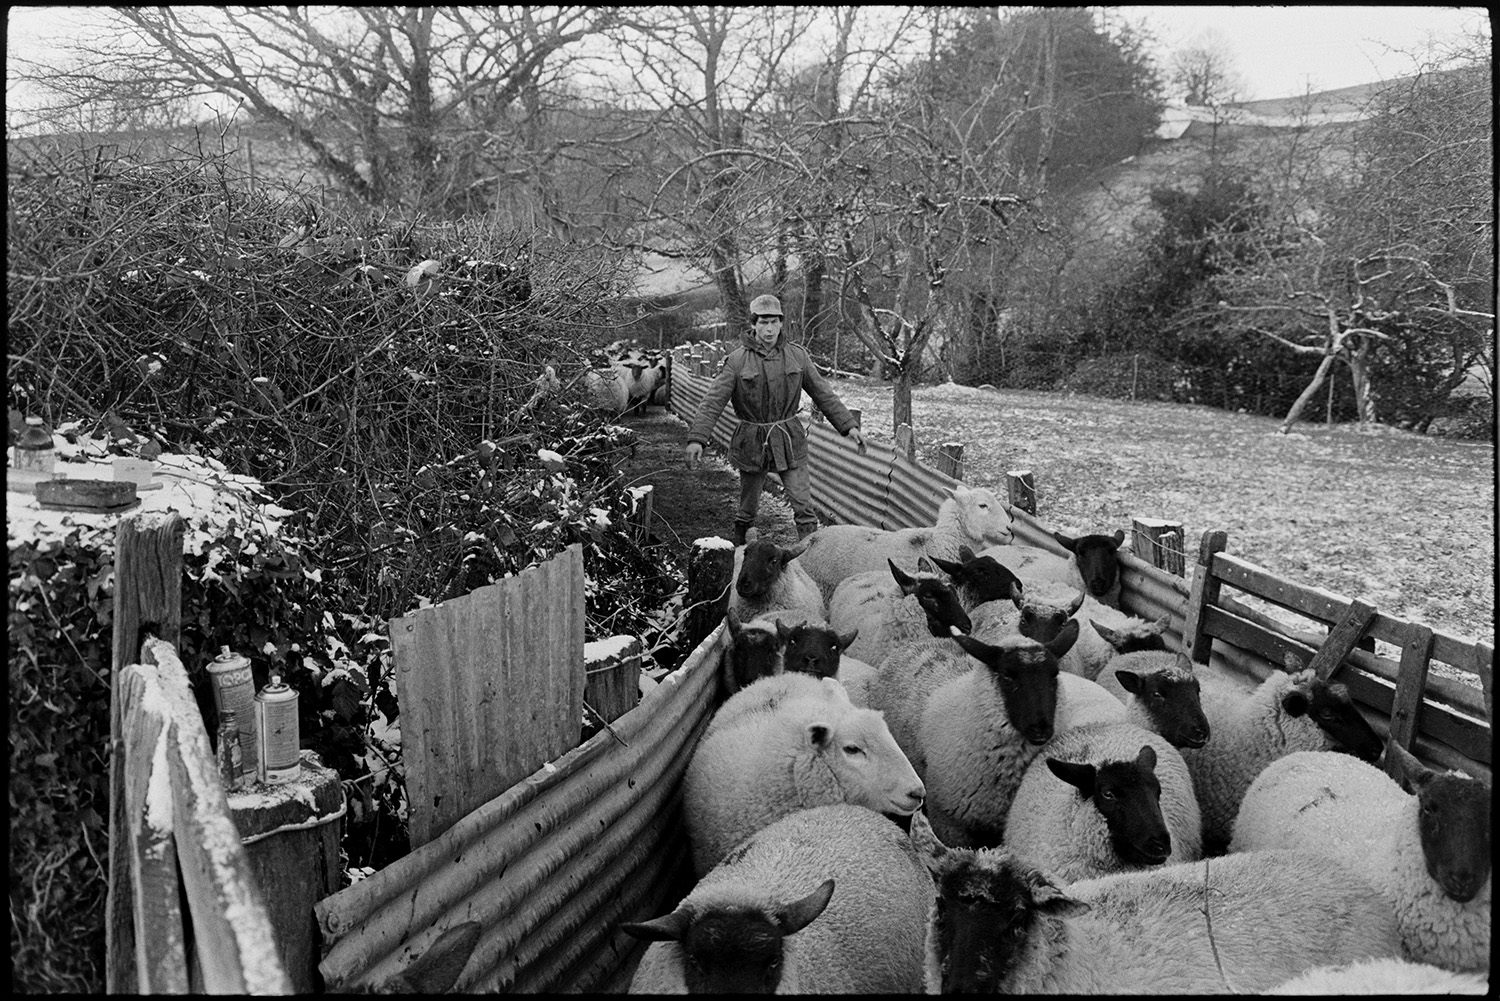 Snow. Farmer inspecting sheep in pen, clipping feet, and drenching, syringe and ointment.
[A man is driving sheep in for inspection at Westpark Farm, Iddesleigh. They are in a holding pen made of corrugated iron sheets in a field lightly covered in snow. Drenching equipment and marking sprays are visible on a gate post. Trees are visible in the background.]